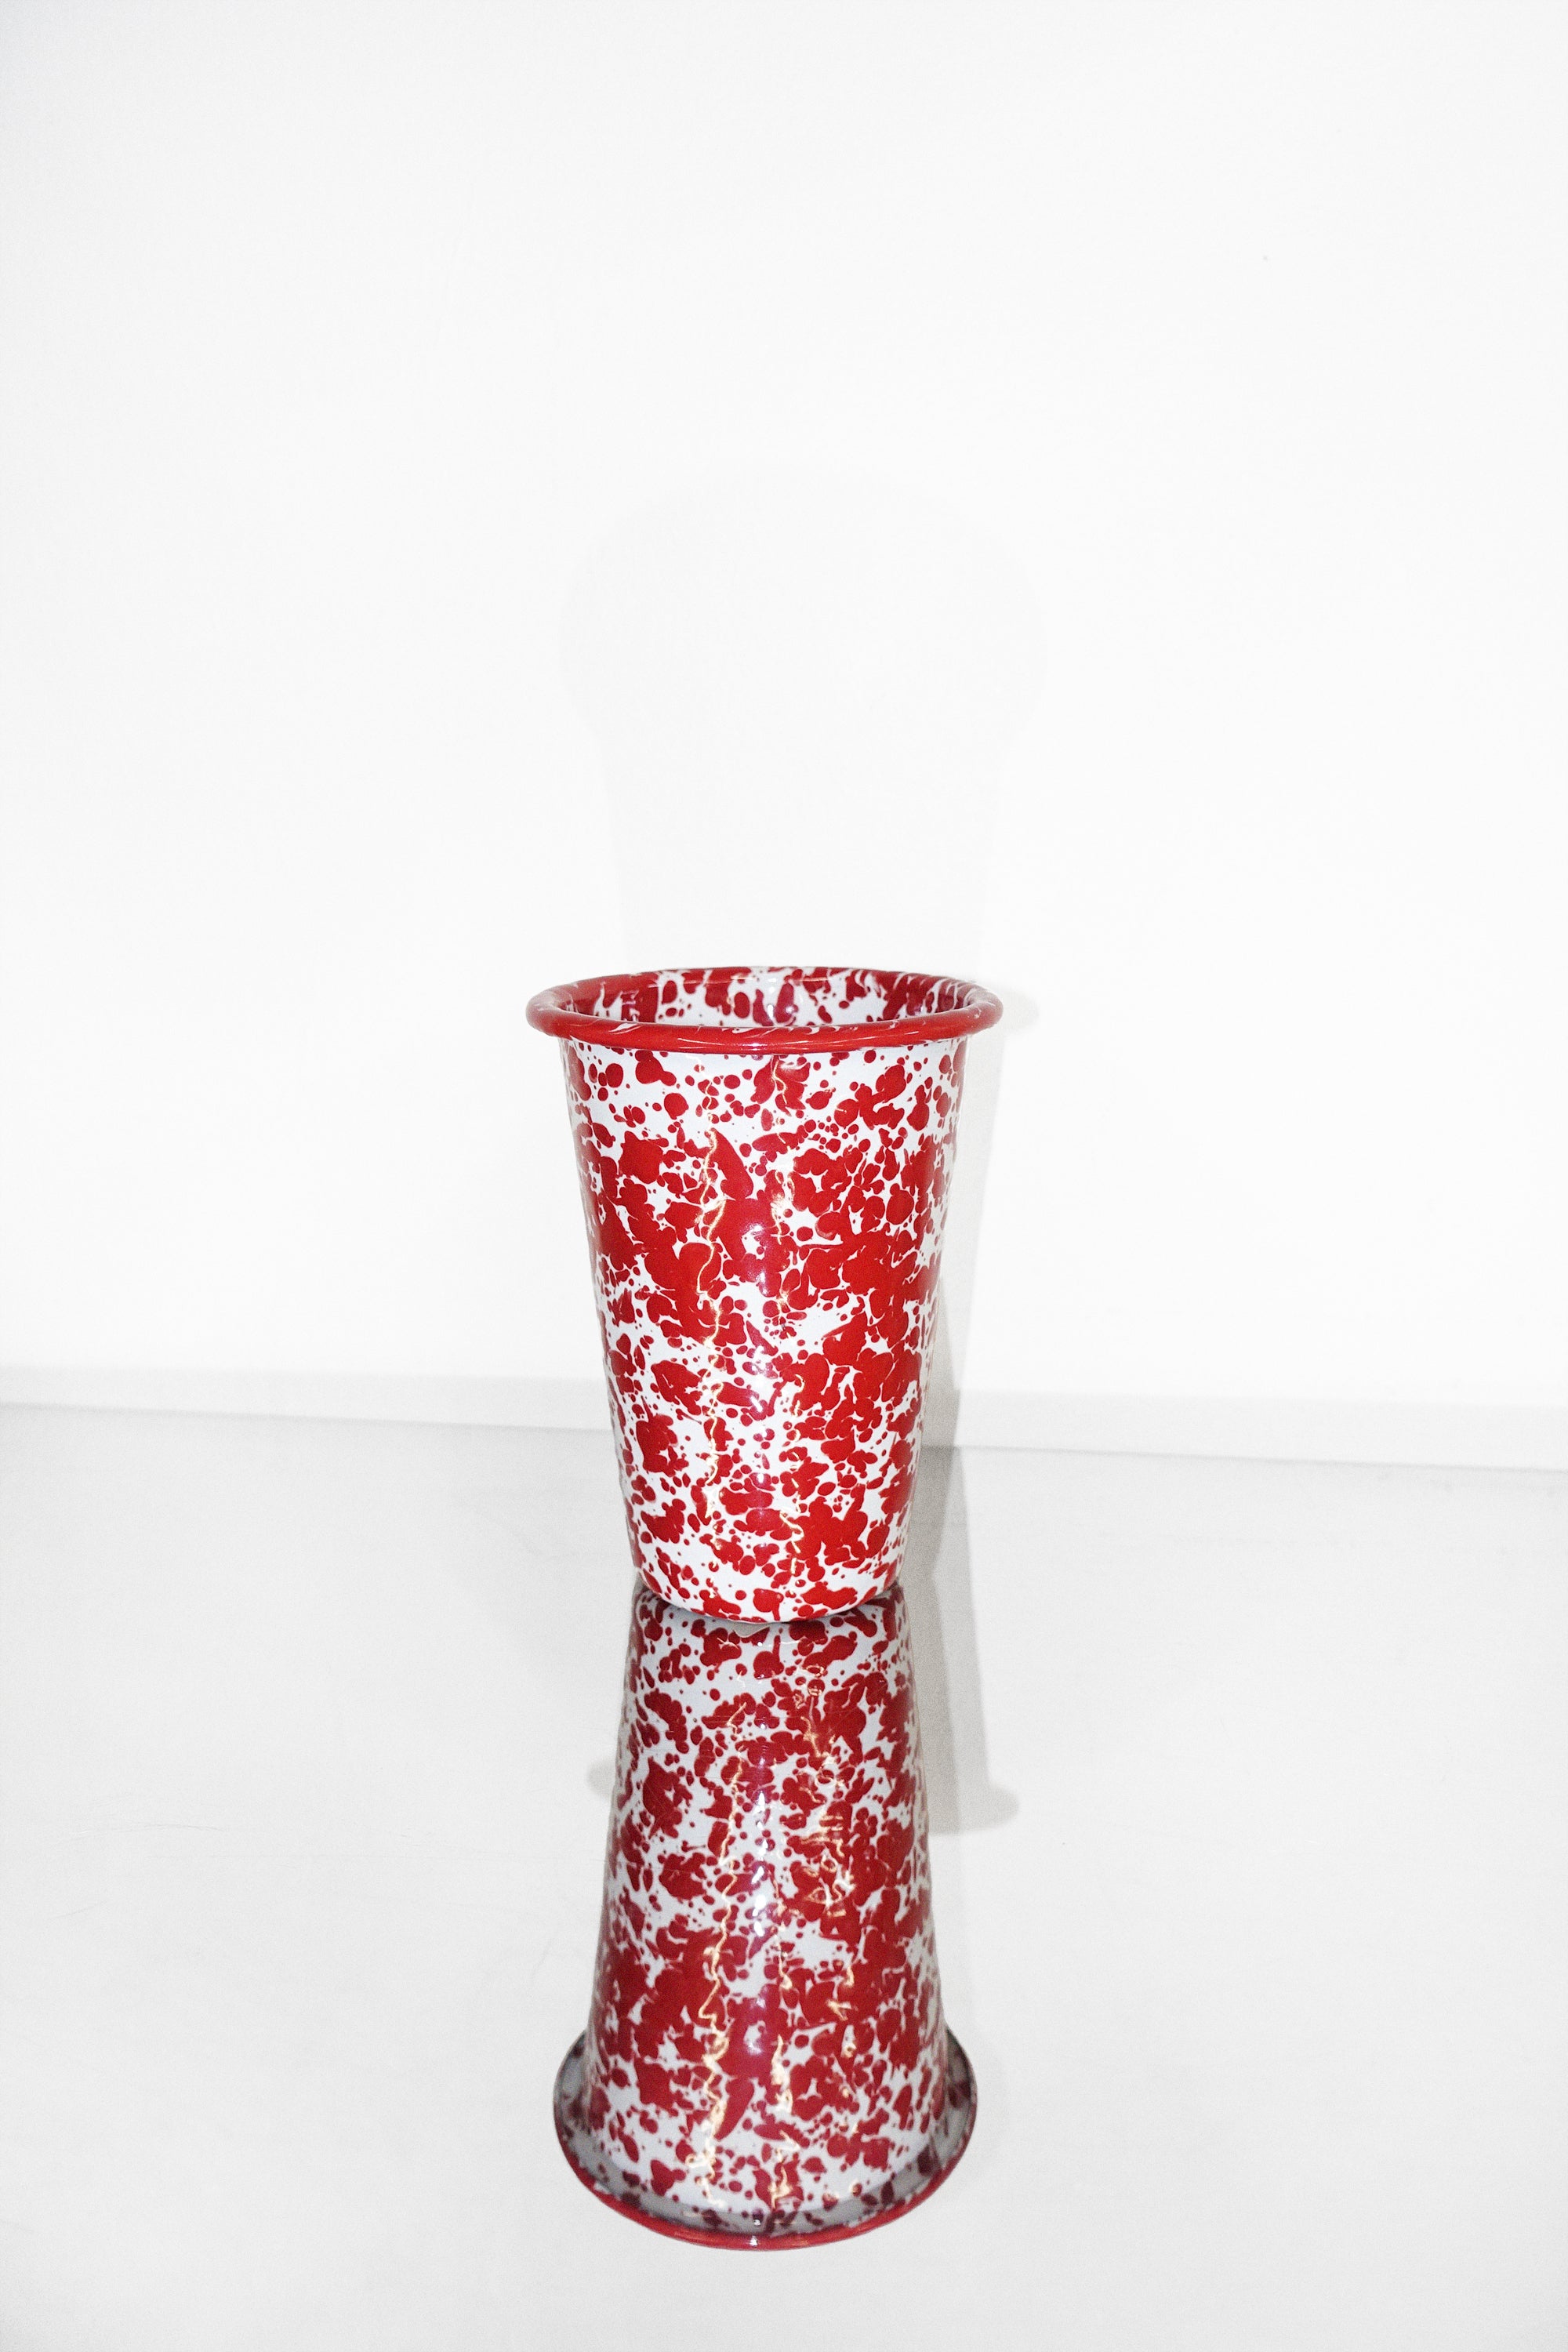 14oz Tumbler in Red Splatter Enamelware by Crow Canyon Home